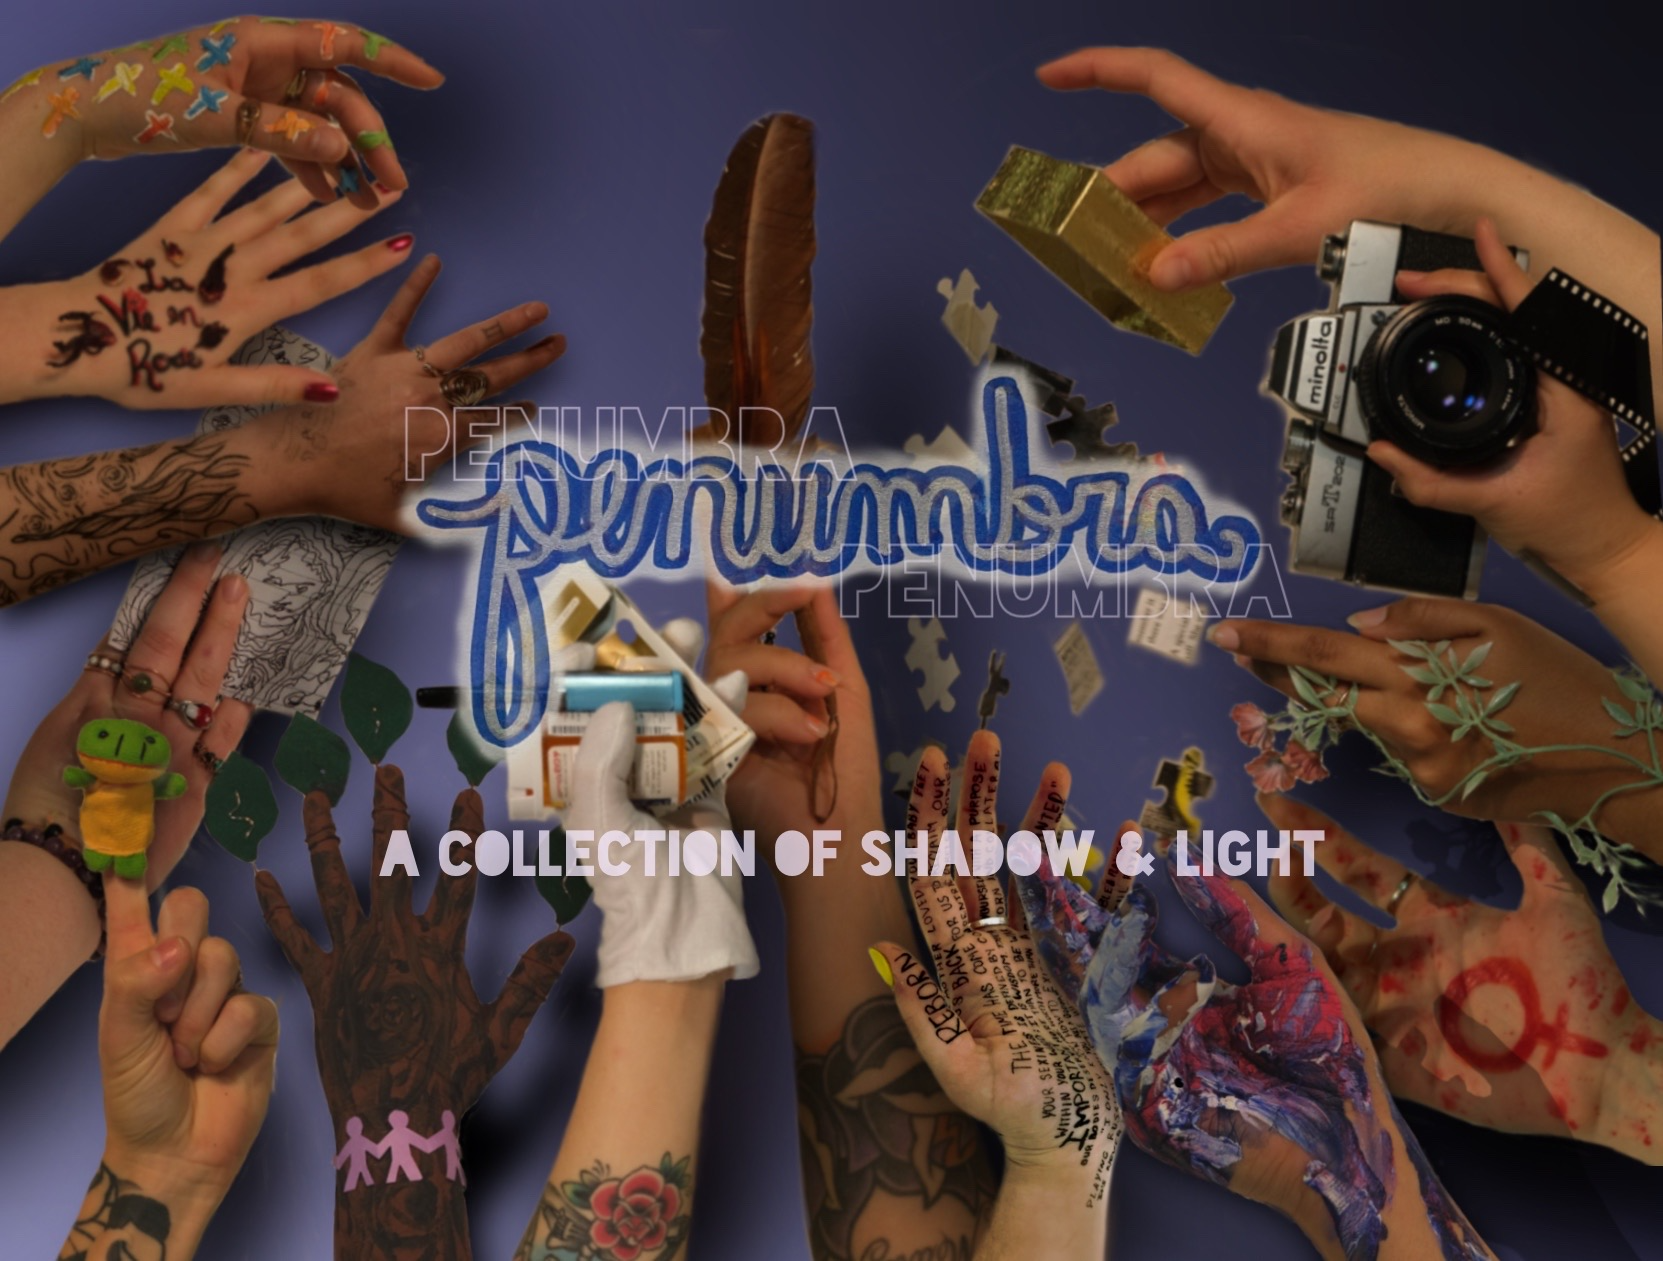 A photo of many hands reaching in to the middle of the photo over a purple background. In the center, the word "penumbra" is written in purple cursive font and outlined in white.